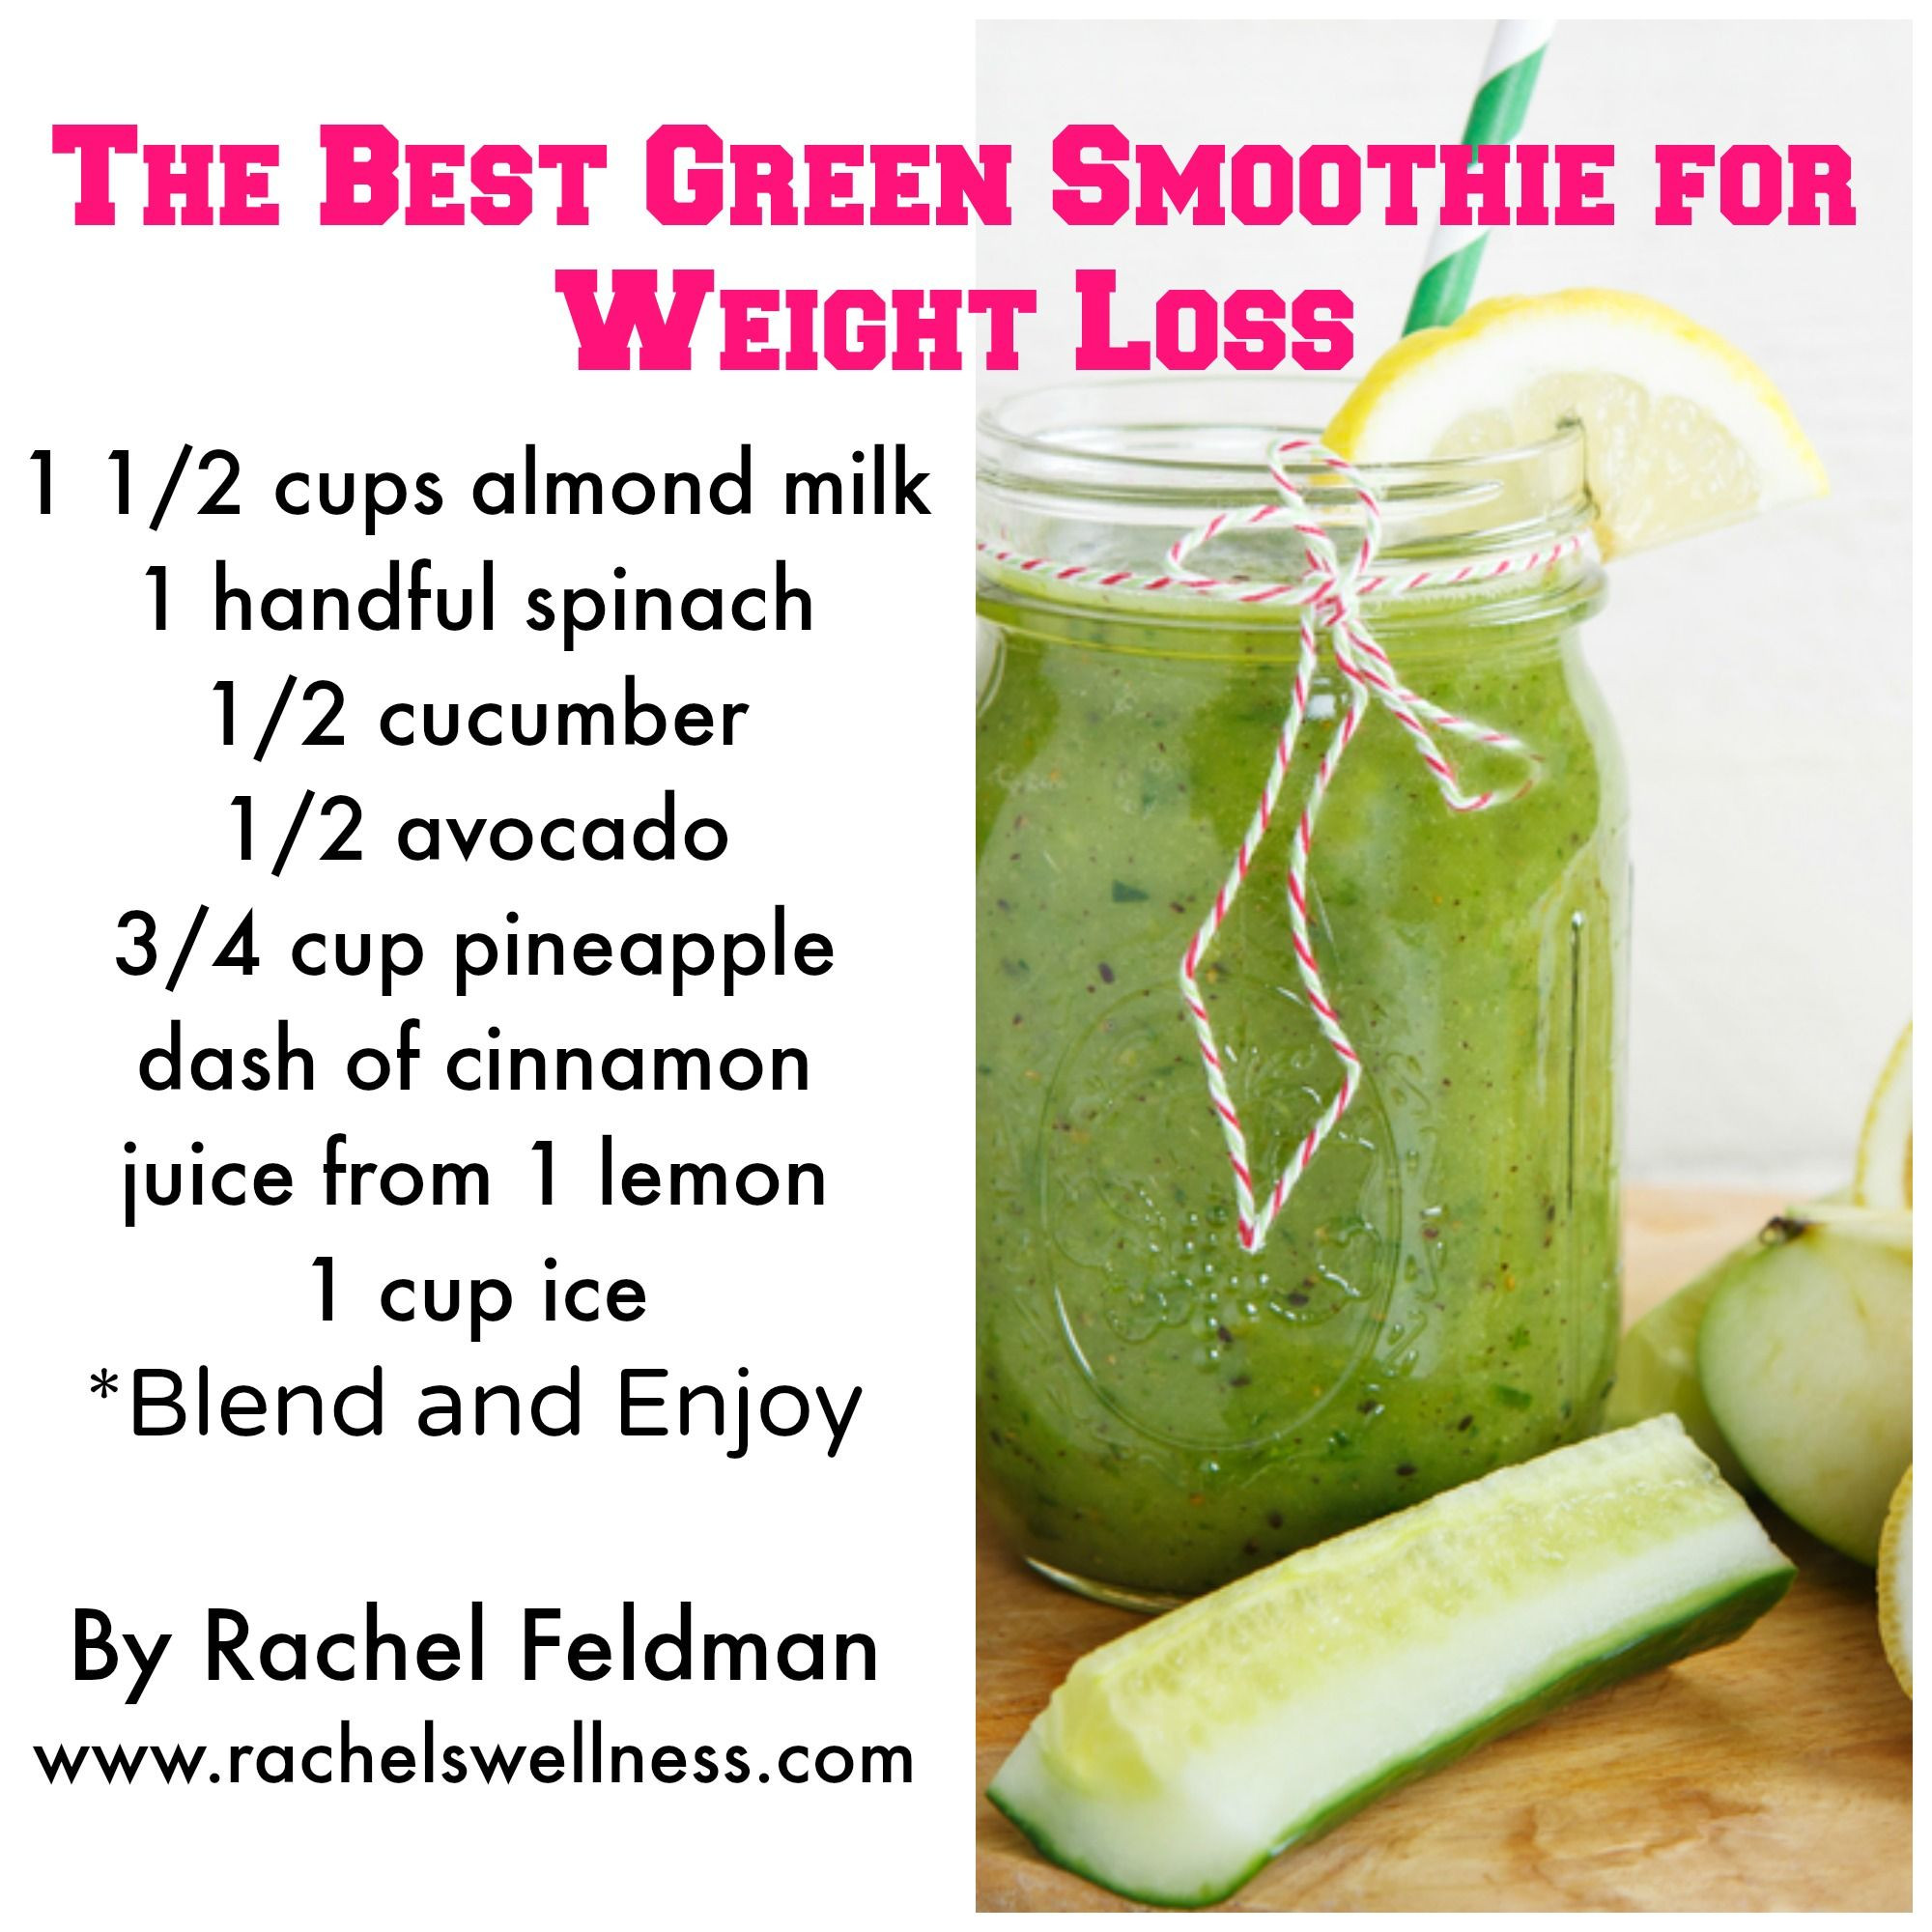 Fruit Smoothies For Weight Loss
 7 Healthy Green Smoothie Recipes For Weight Loss